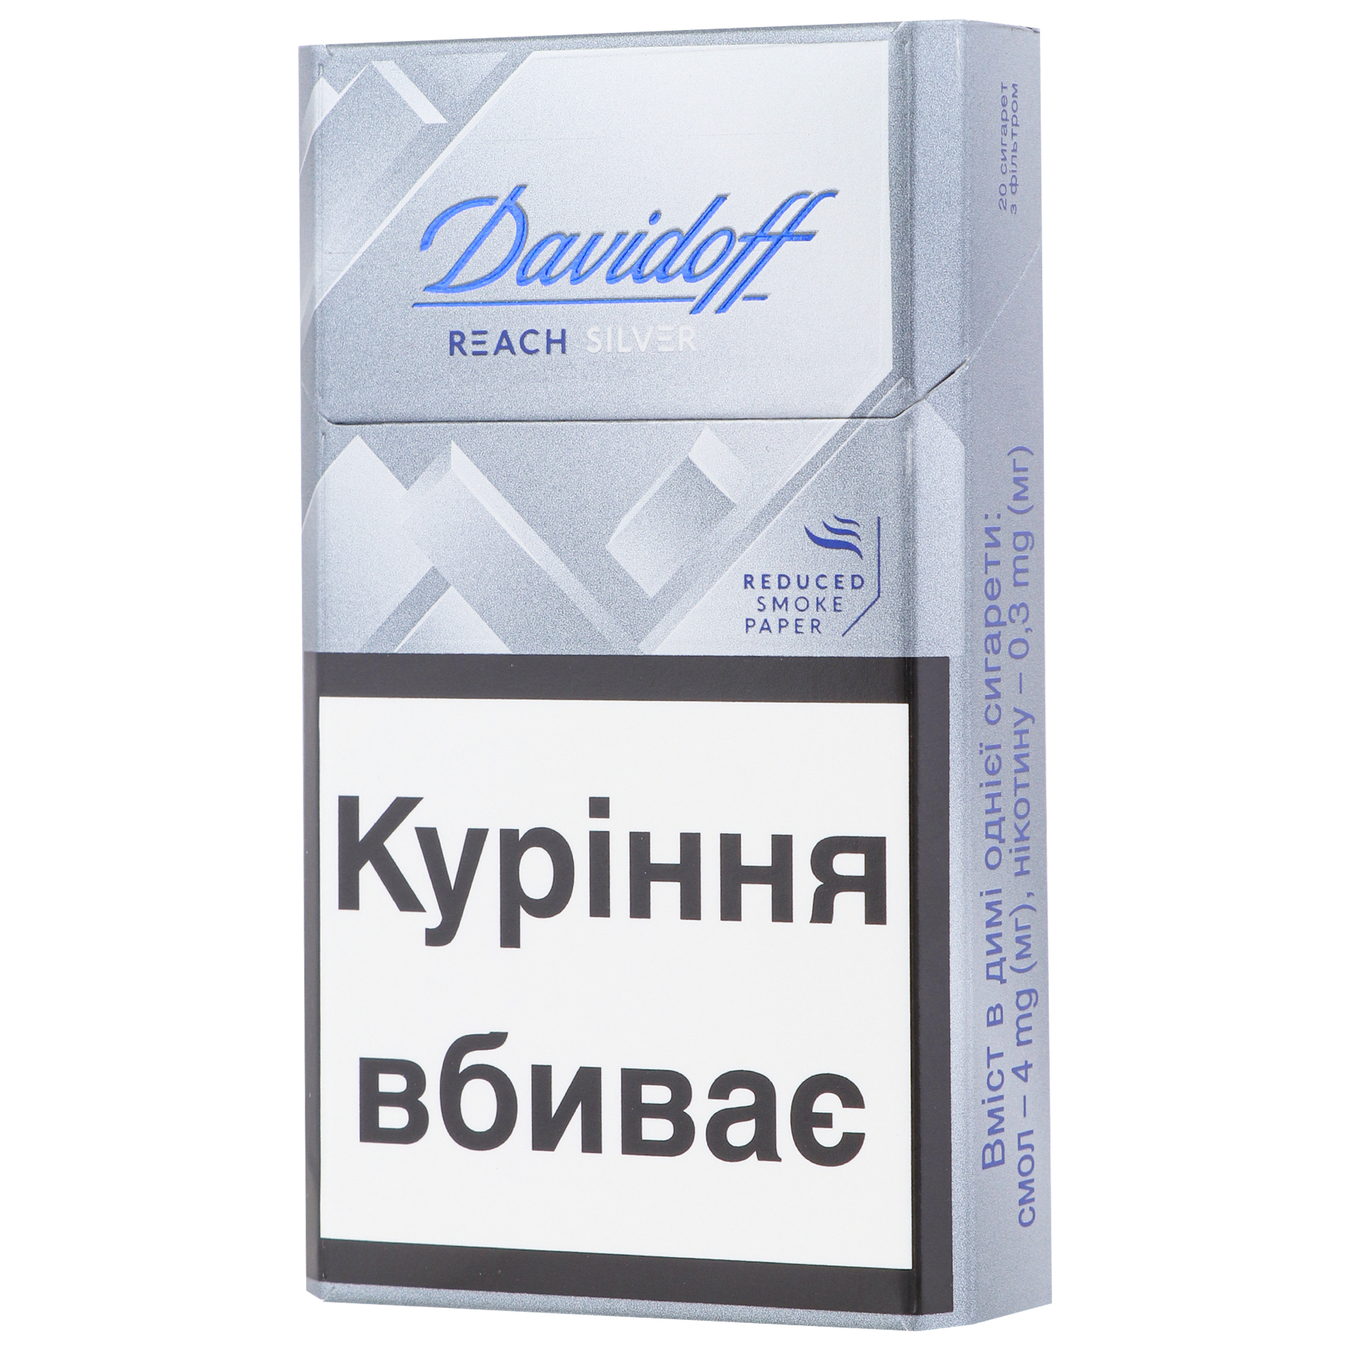 Davidoff Reach SILVER cigarettes 20 pcs (the price is indicated without ...